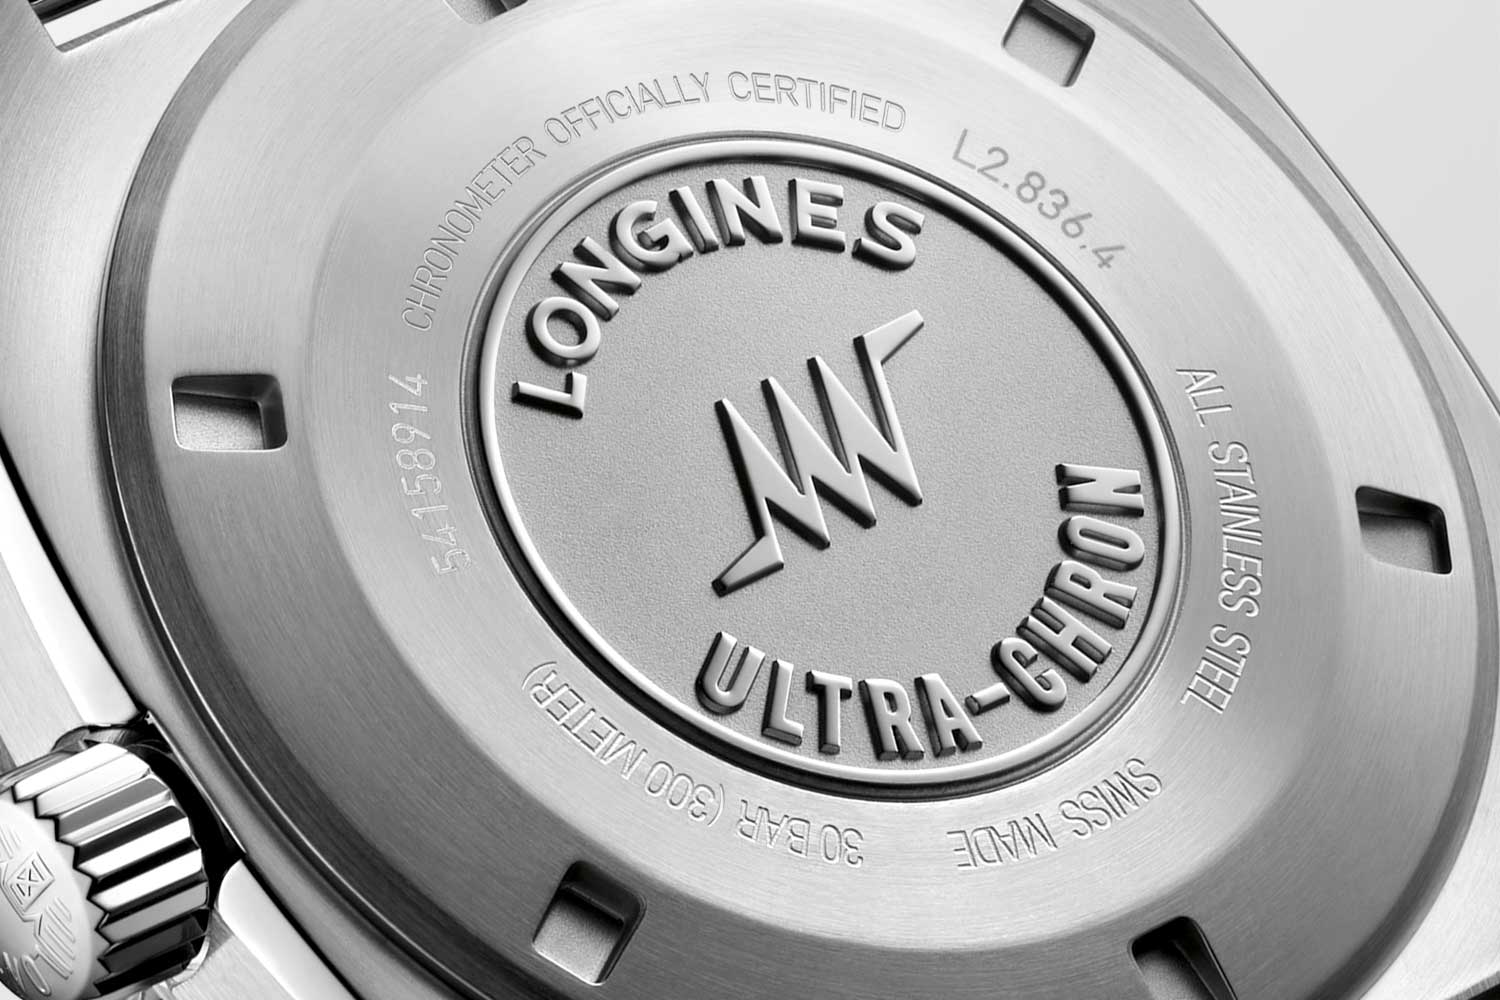 The original Ultra-Chron logo is embossed on the caseback, the crown is screwed-down, and watch has 300m water resistance rating